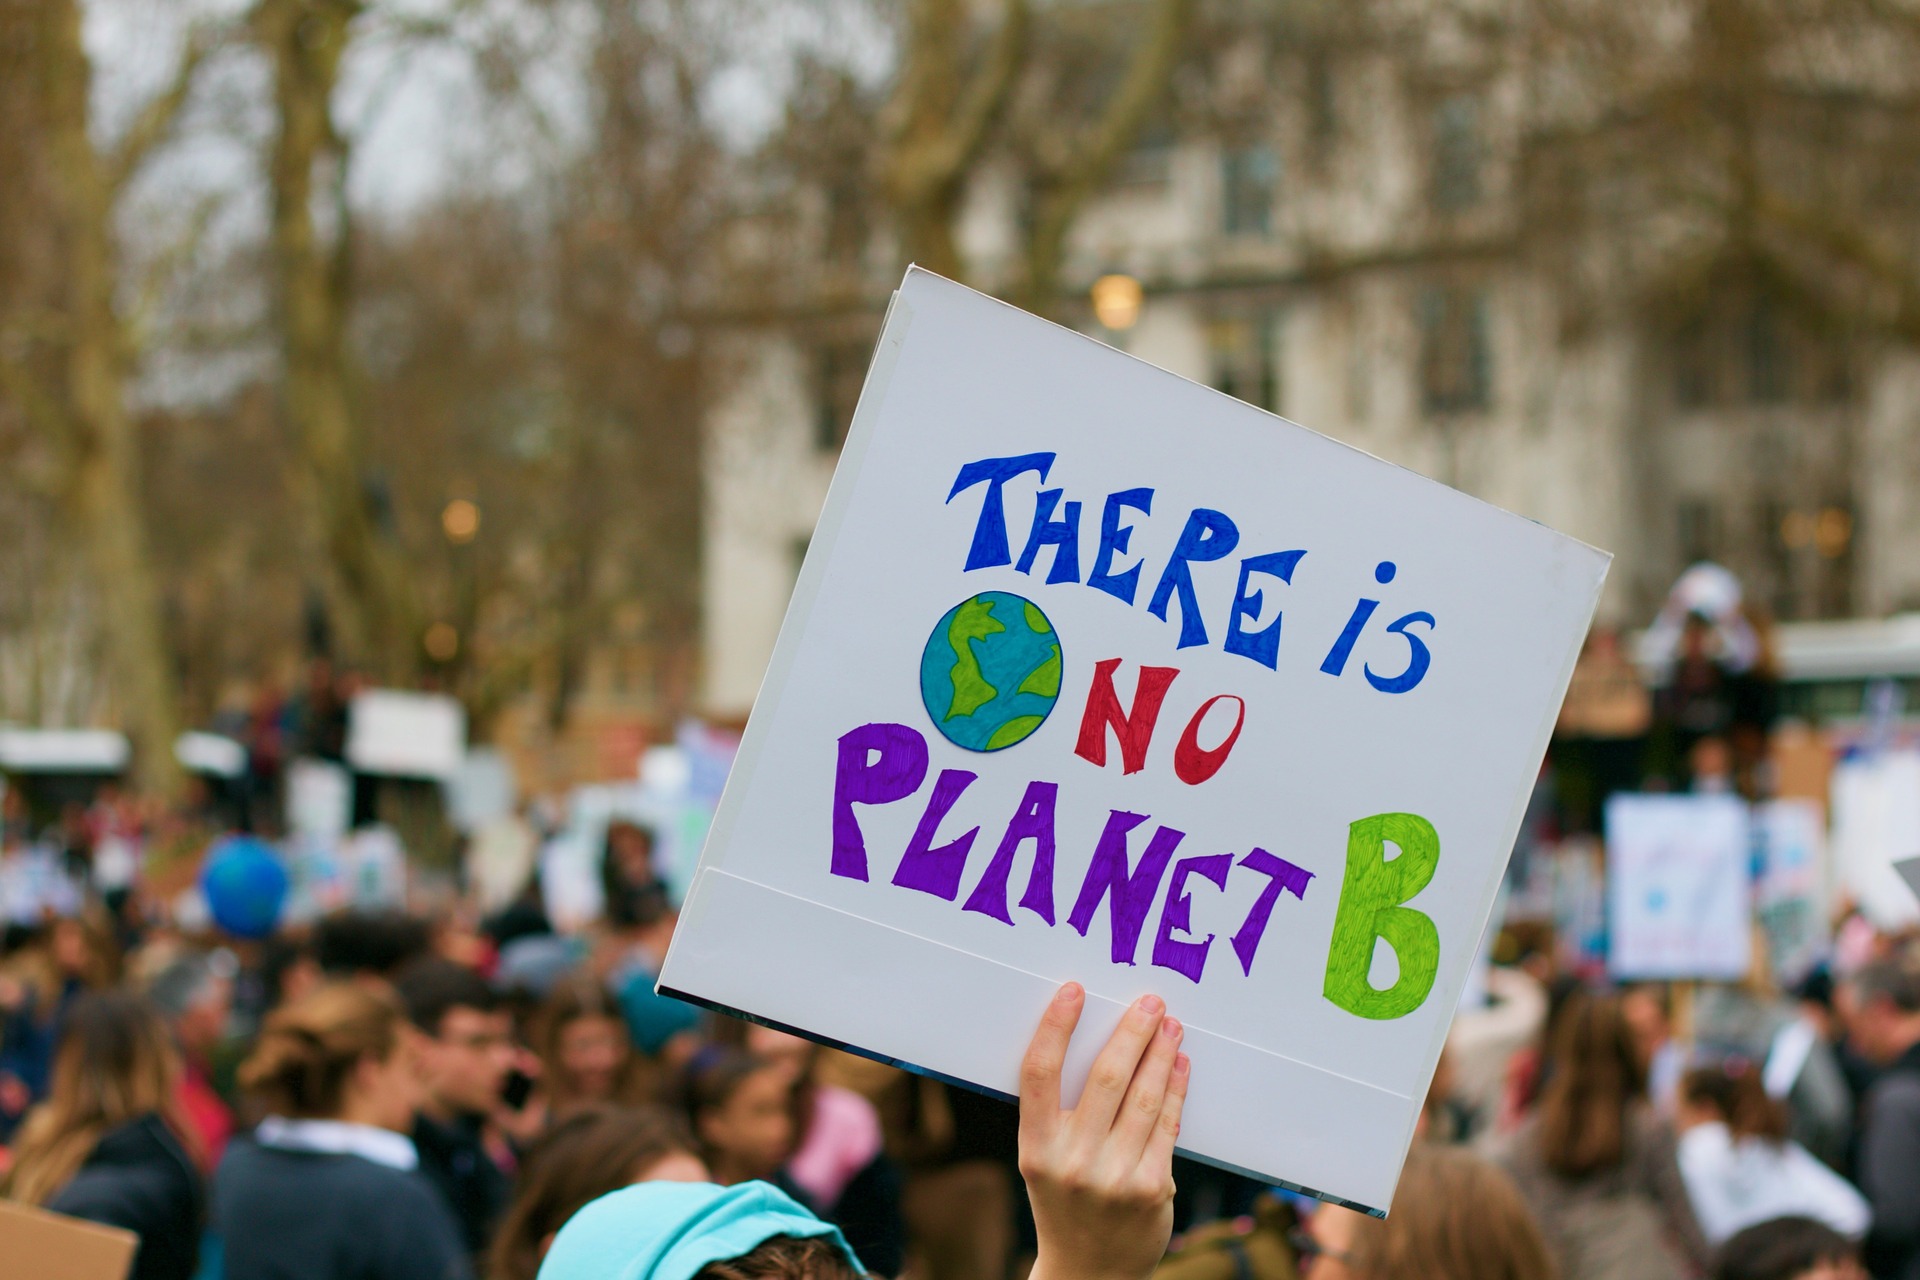 Protester at protest holding a sign reading "There is no planet B"